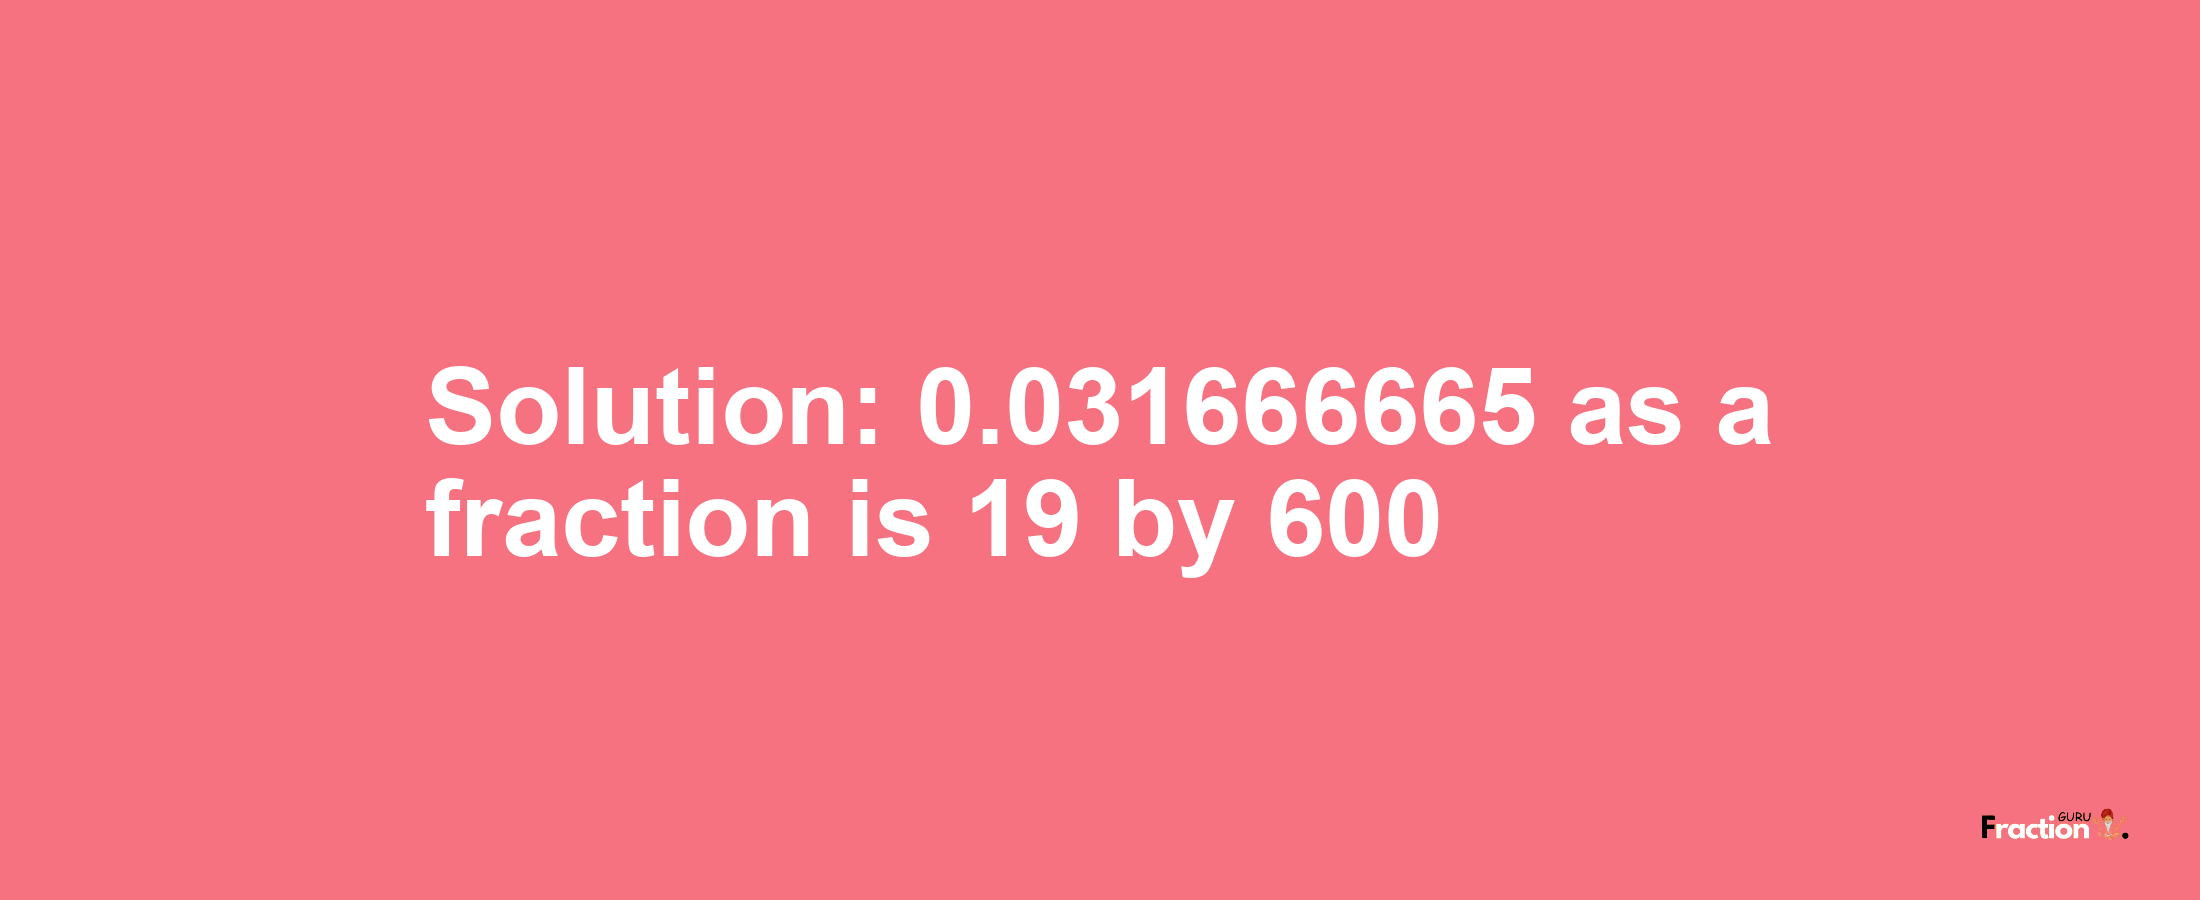 Solution:0.031666665 as a fraction is 19/600